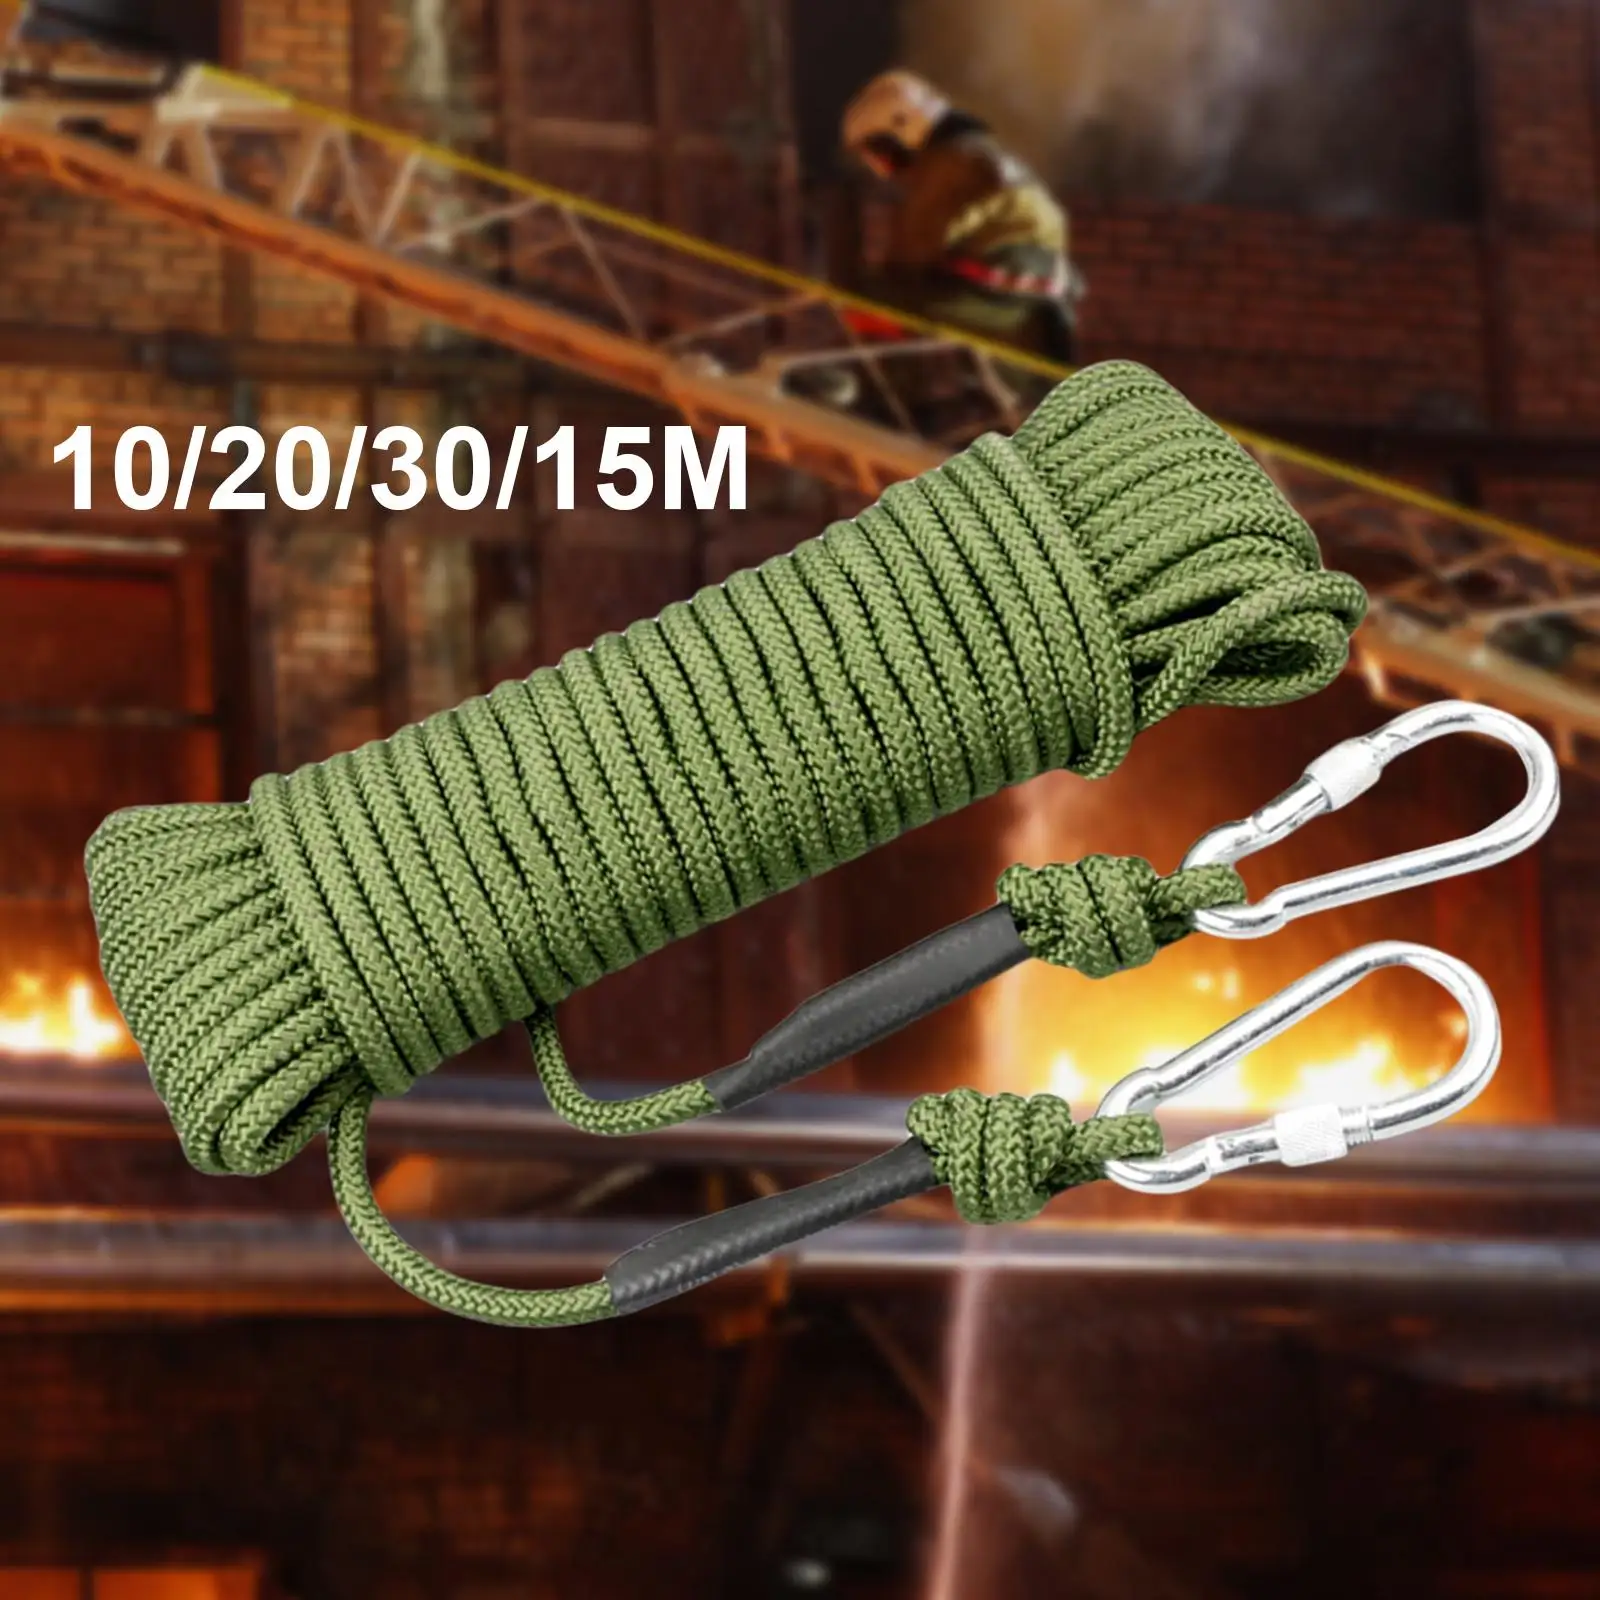 8 mm Climbing Rope  with 2 Carabiners Rappelling Rope Safety High Strength  Resistant Core for  Emergency